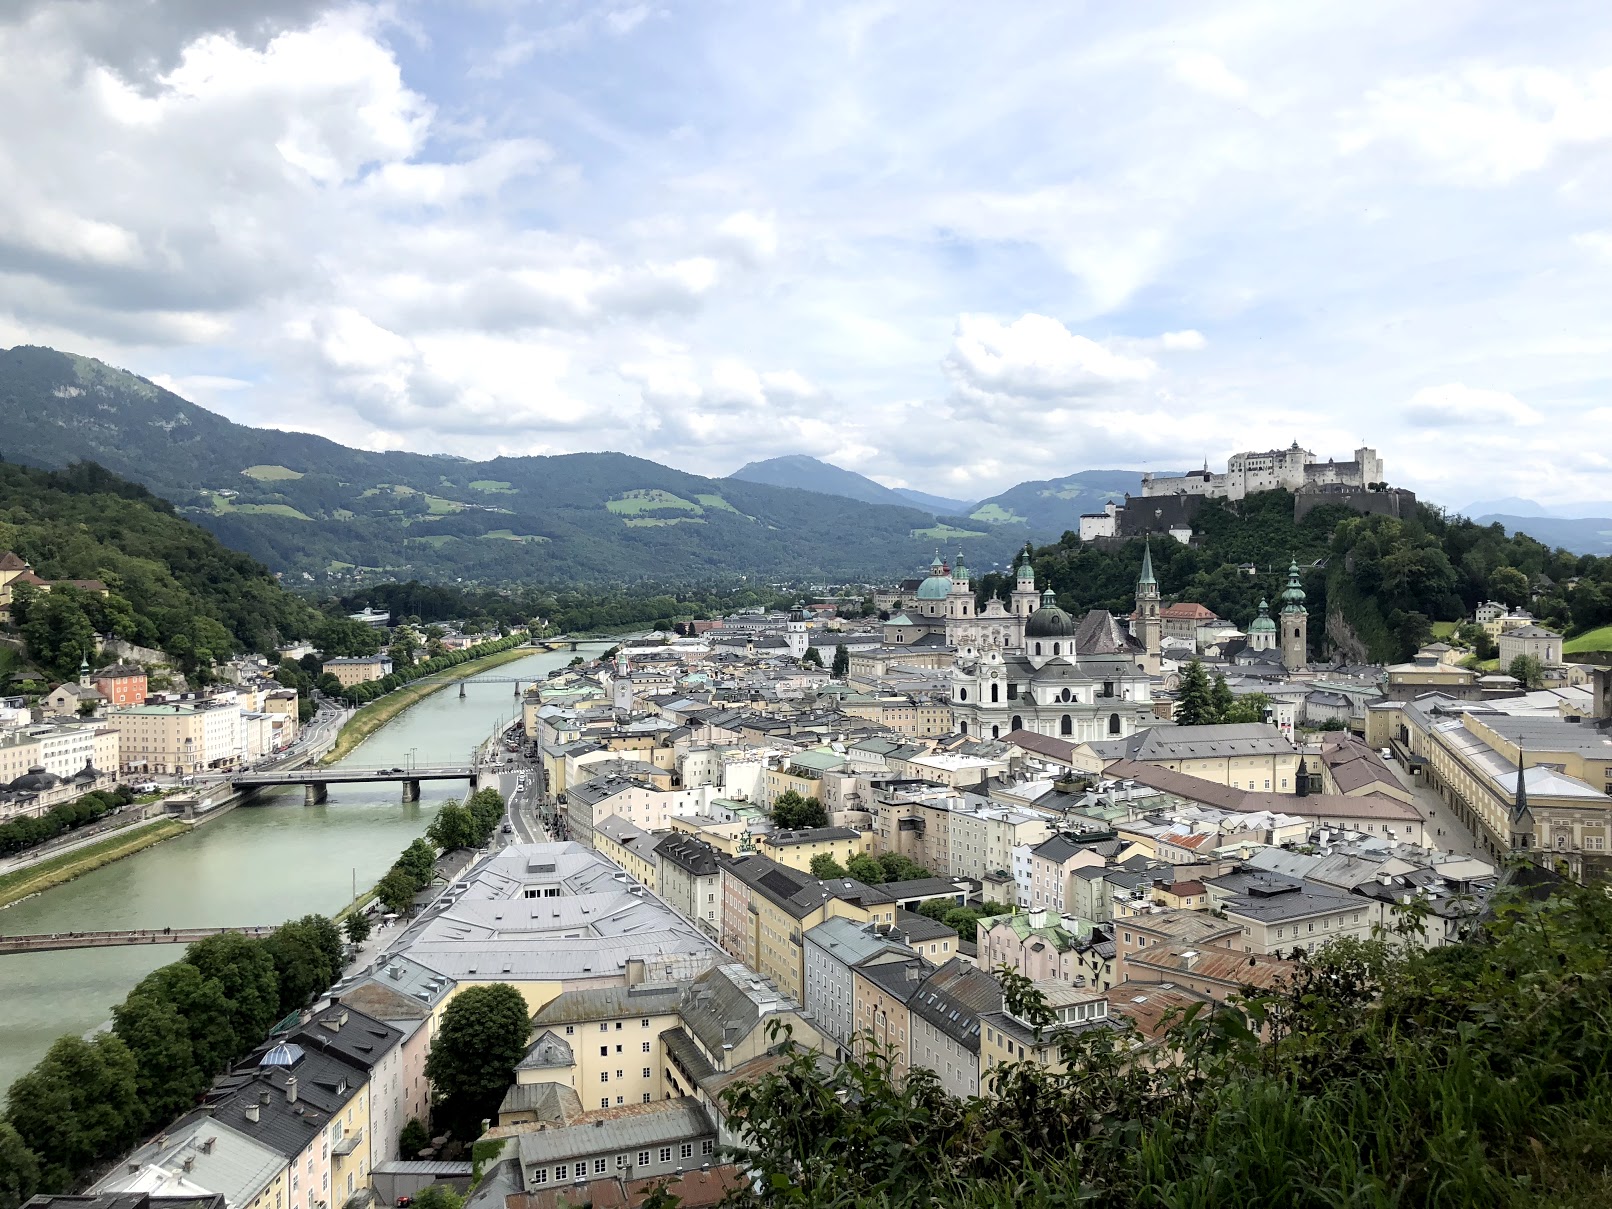 Overlooking Salzburg Austria from the castle